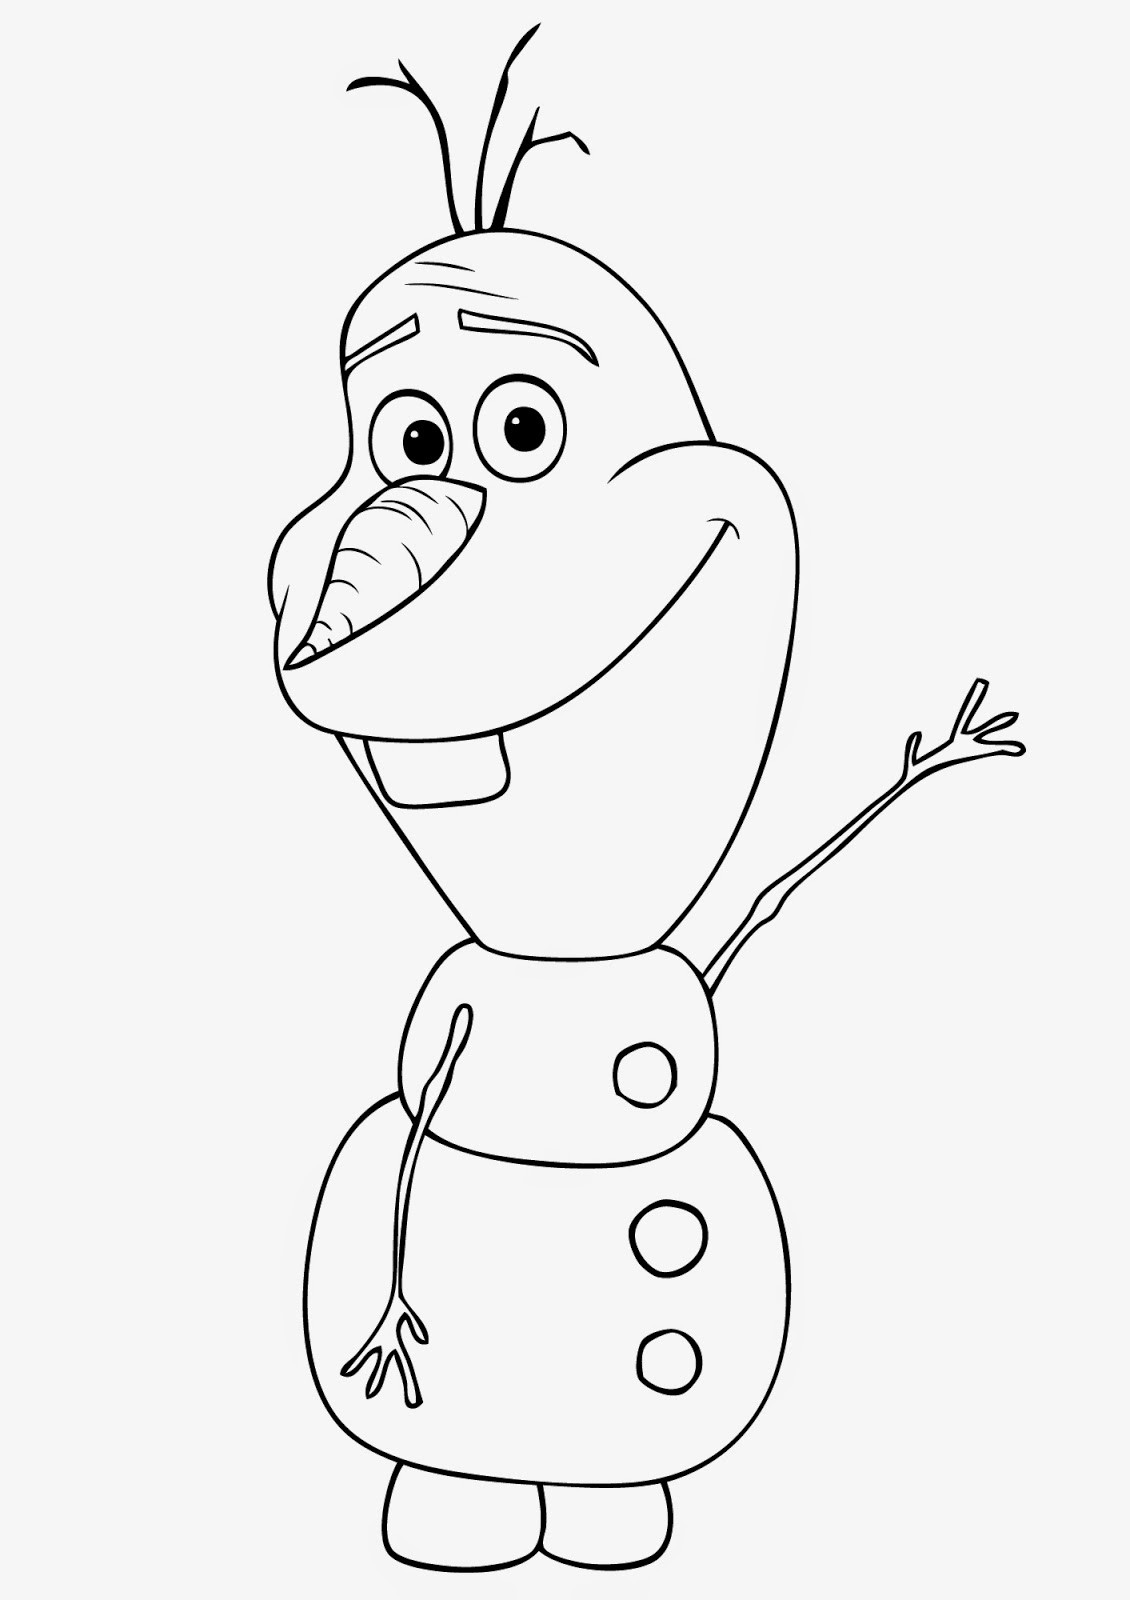 Olaf Printable Coloring Pages
 Frozens Olaf Coloring Pages Best Coloring Pages For Kids